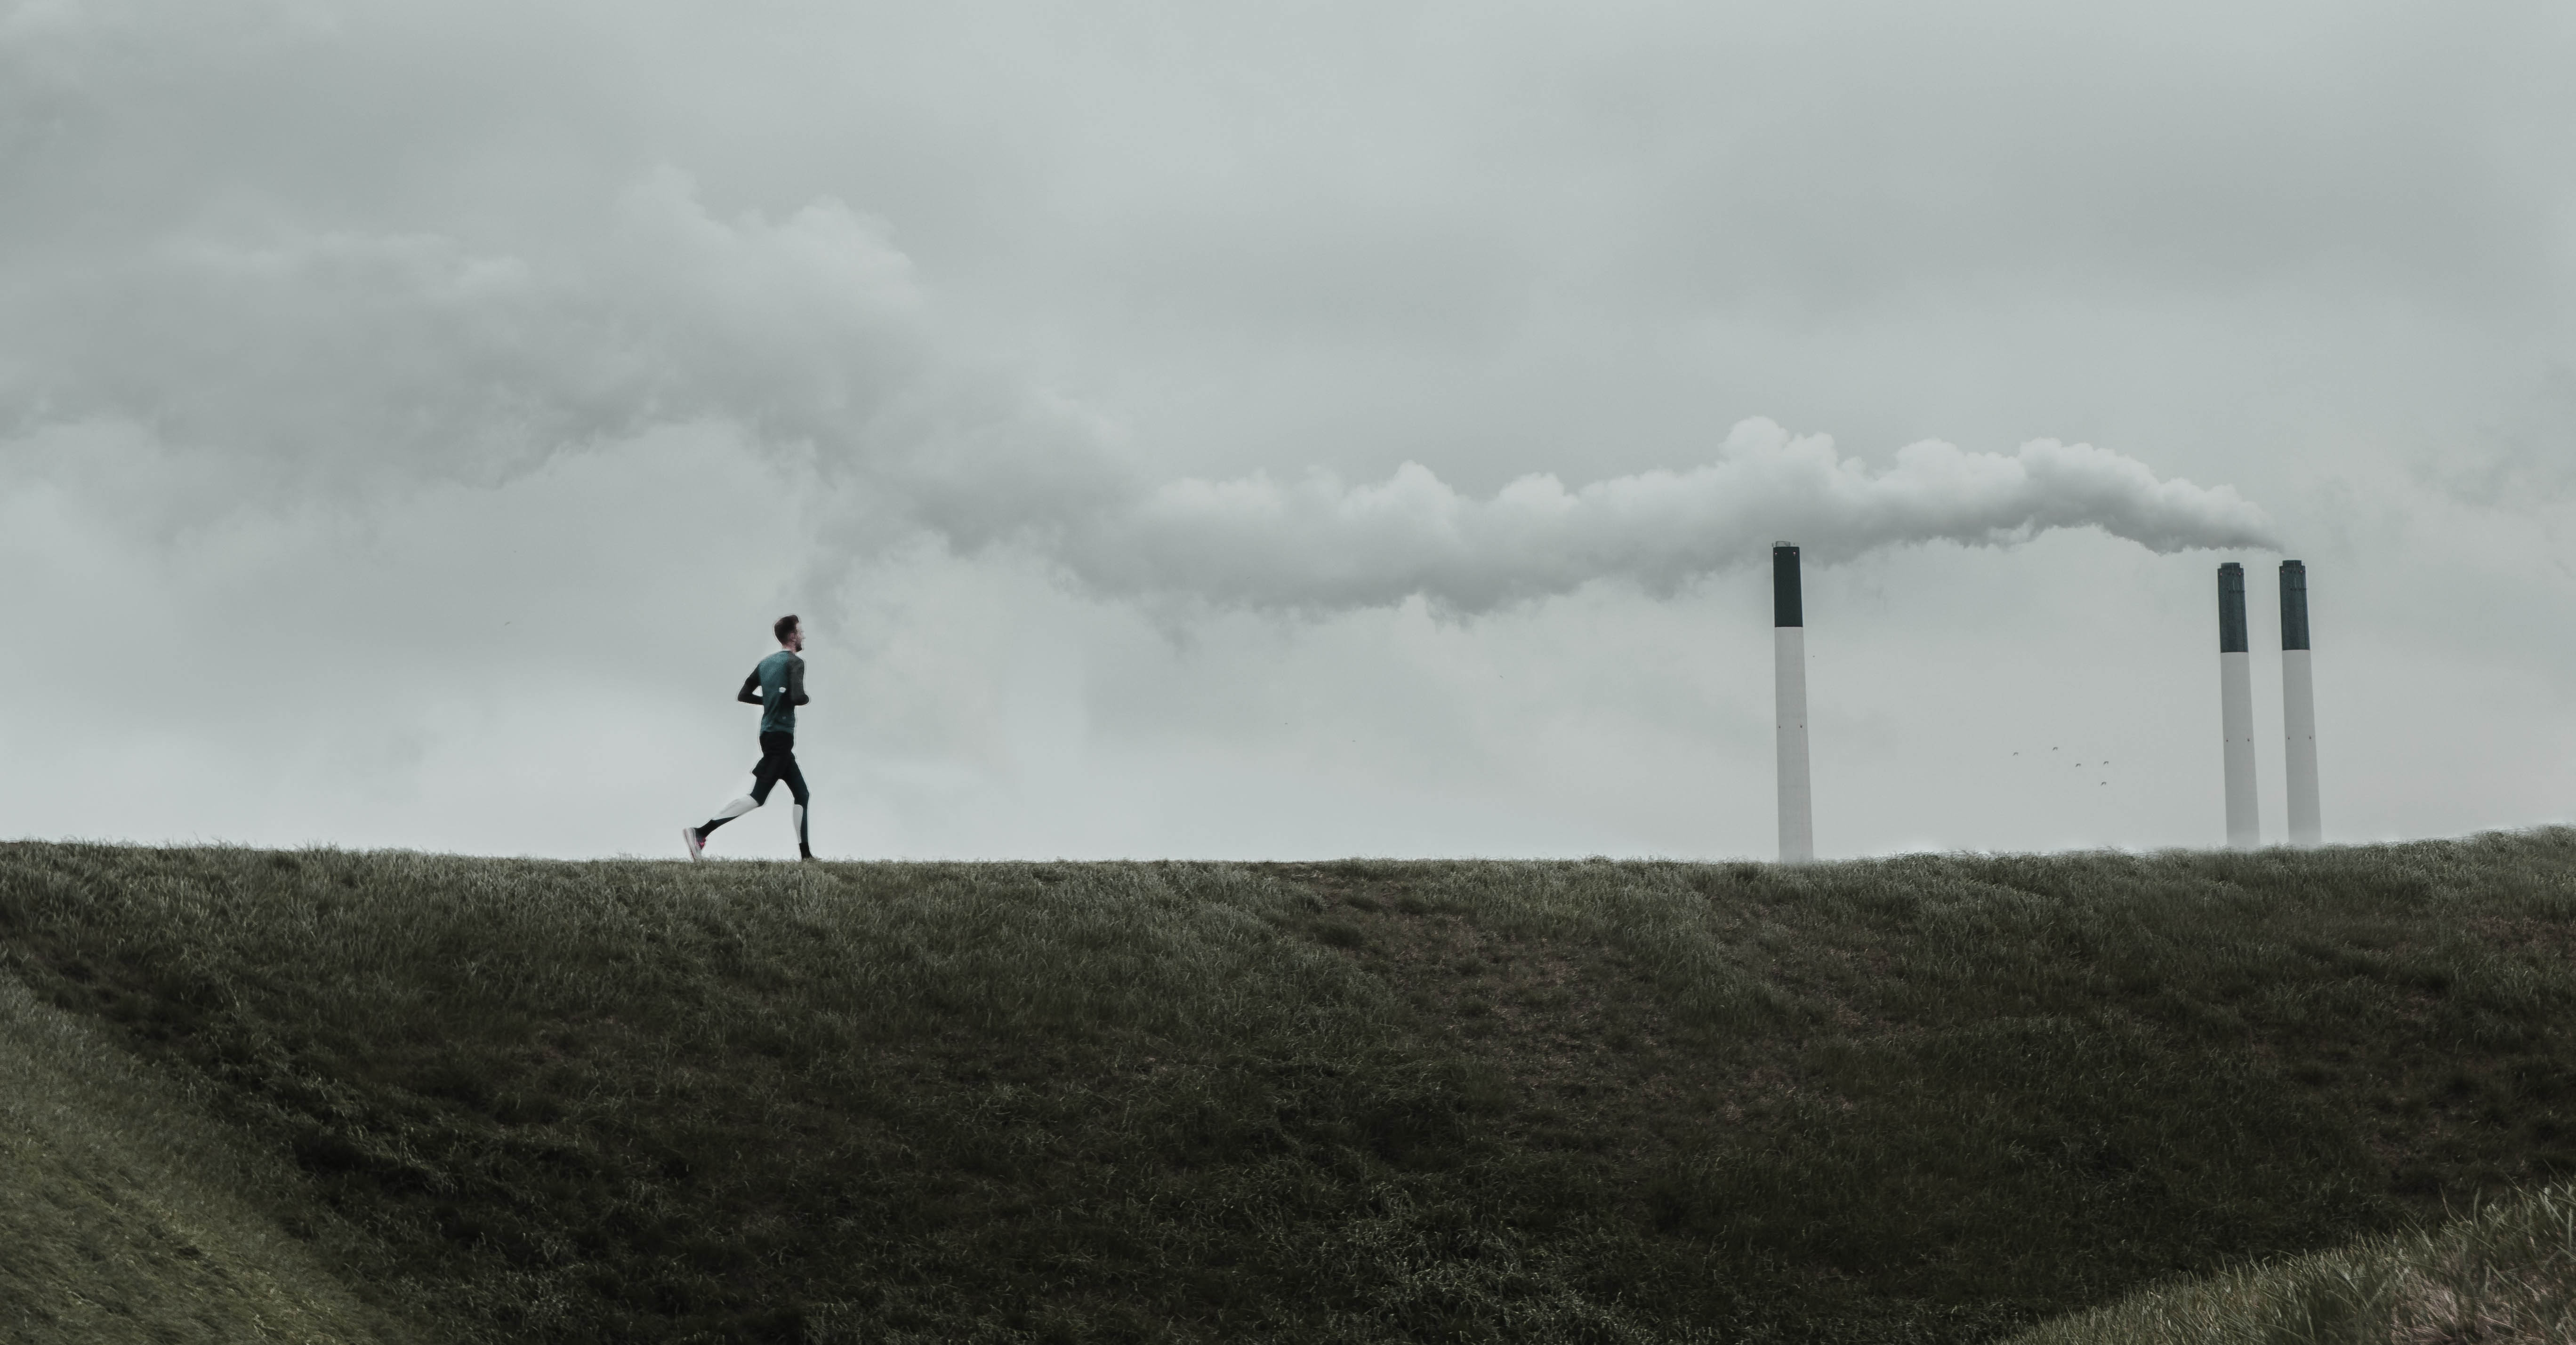 A person runs on a trail near a factory with a plume of smoke.